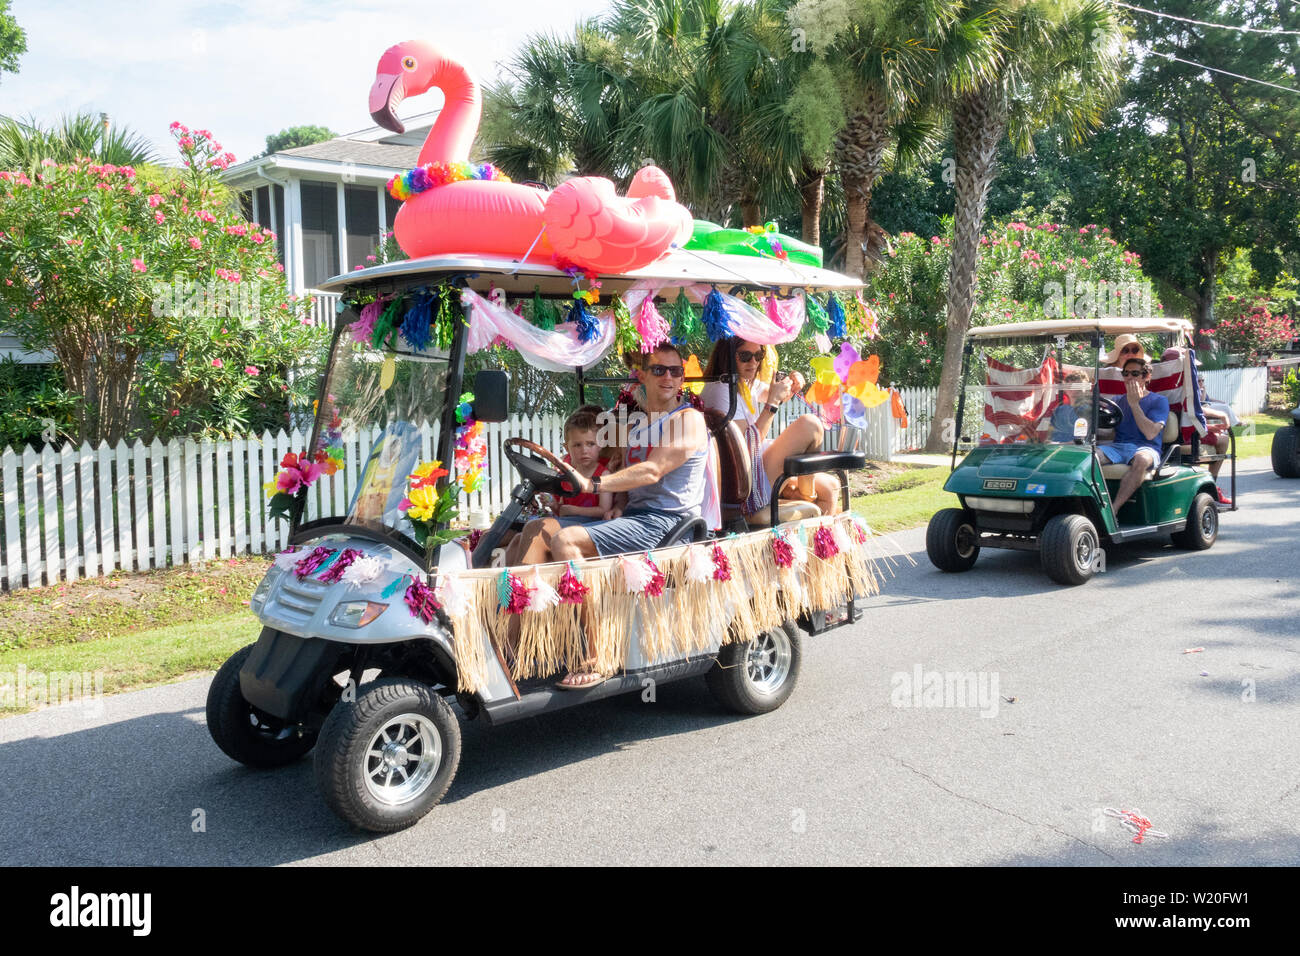 Golf cart floats decorated in tropical style during the annual Independence Day parade July 4, 2019 in Sullivan's Island, South Carolina. The tiny affluent Sea Island beach community across from Charleston holds an outsized golf cart parade featuring more than 75 decorated carts. Stock Photo